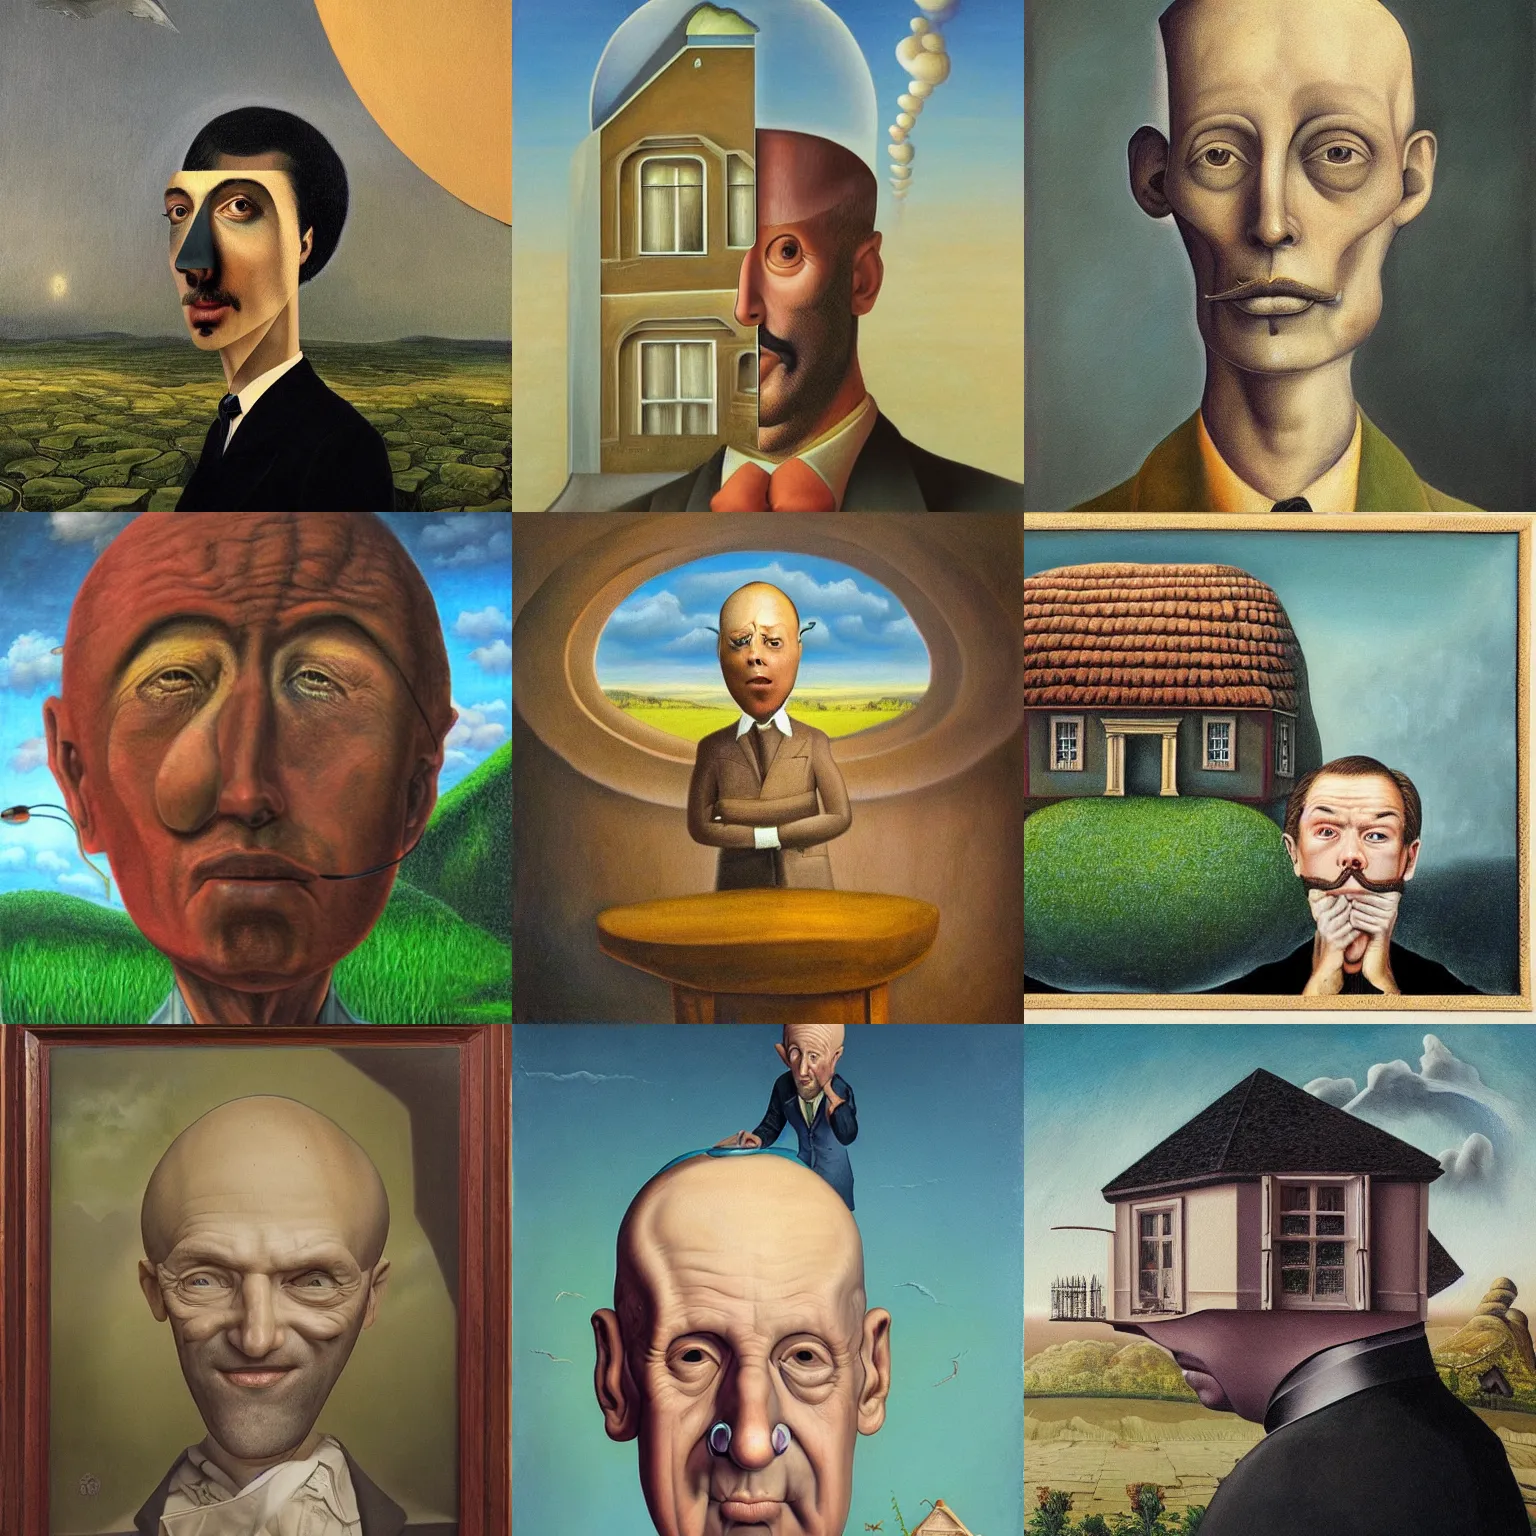 Prompt: A detailed surrealism painting of a man with a head shaped like a house